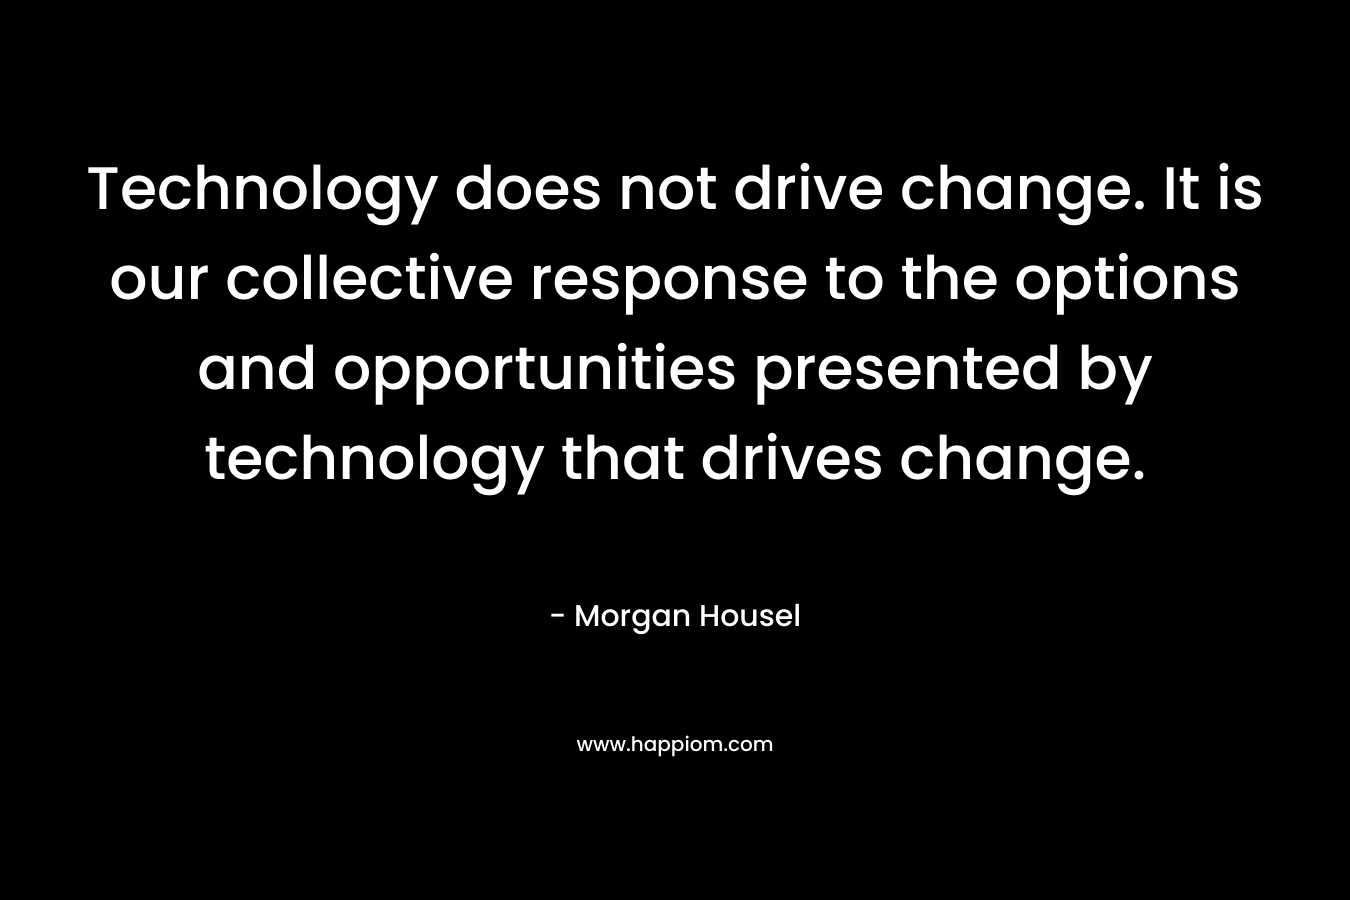 Technology does not drive change. It is our collective response to the options and opportunities presented by technology that drives change. – Morgan Housel